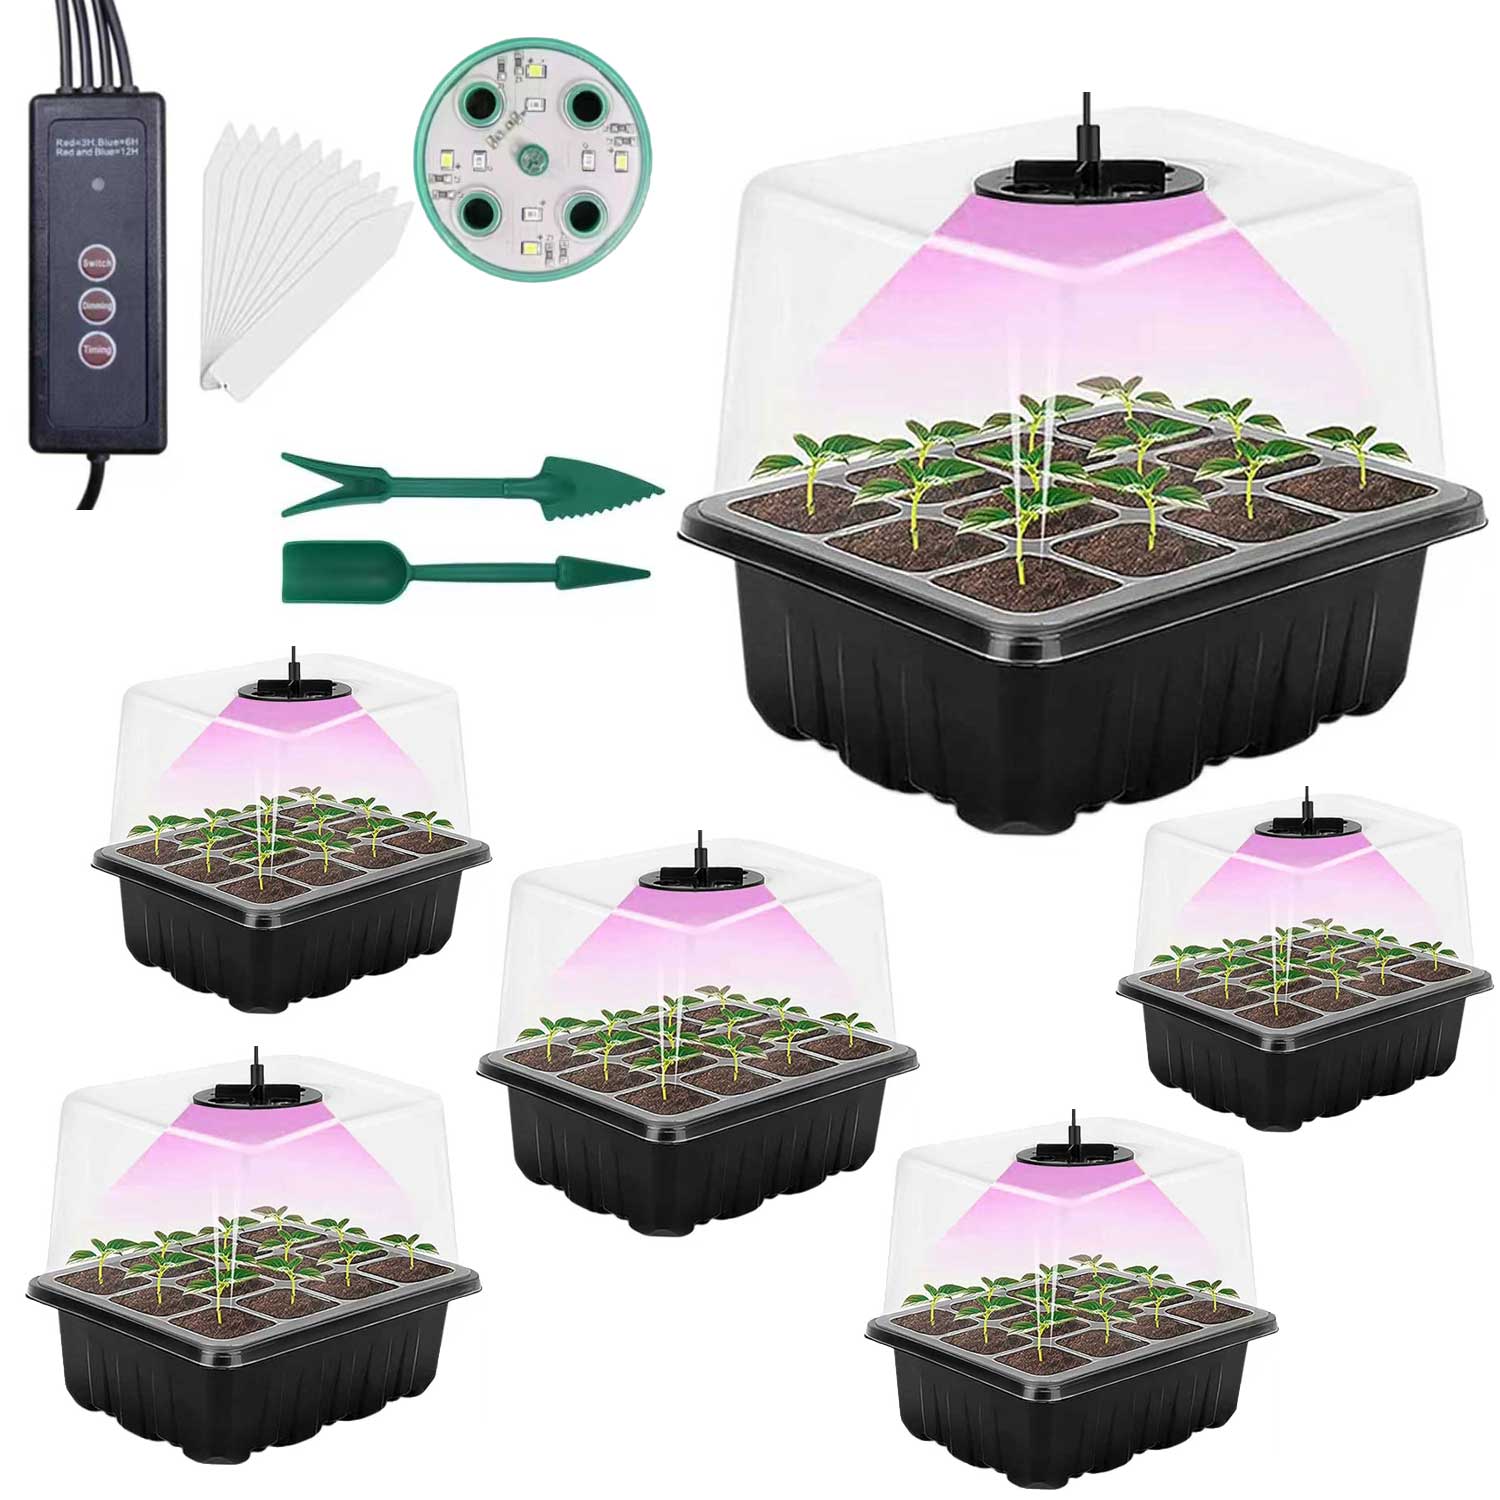 6-Pack 72 Cells Seed Starter Tray with Light Seed Starter Kit with Grow LightSeedling Starter Trays with Vented Humidity Dome and Base  Indoor Gardening Plant Germination Kit Round Light